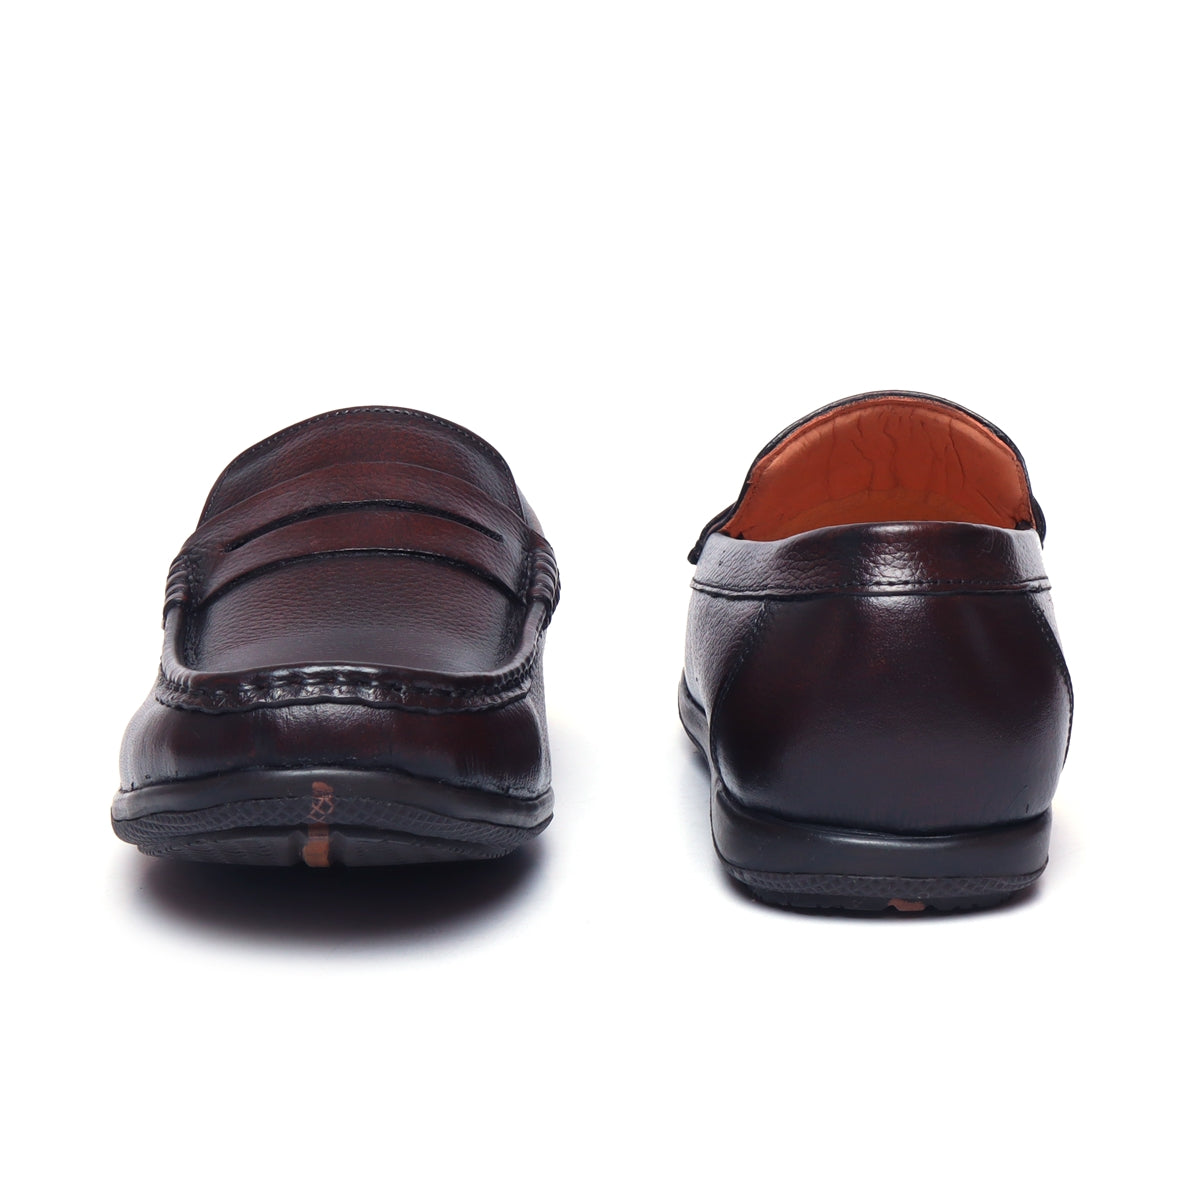 Leather Loafers for Men_ZS8